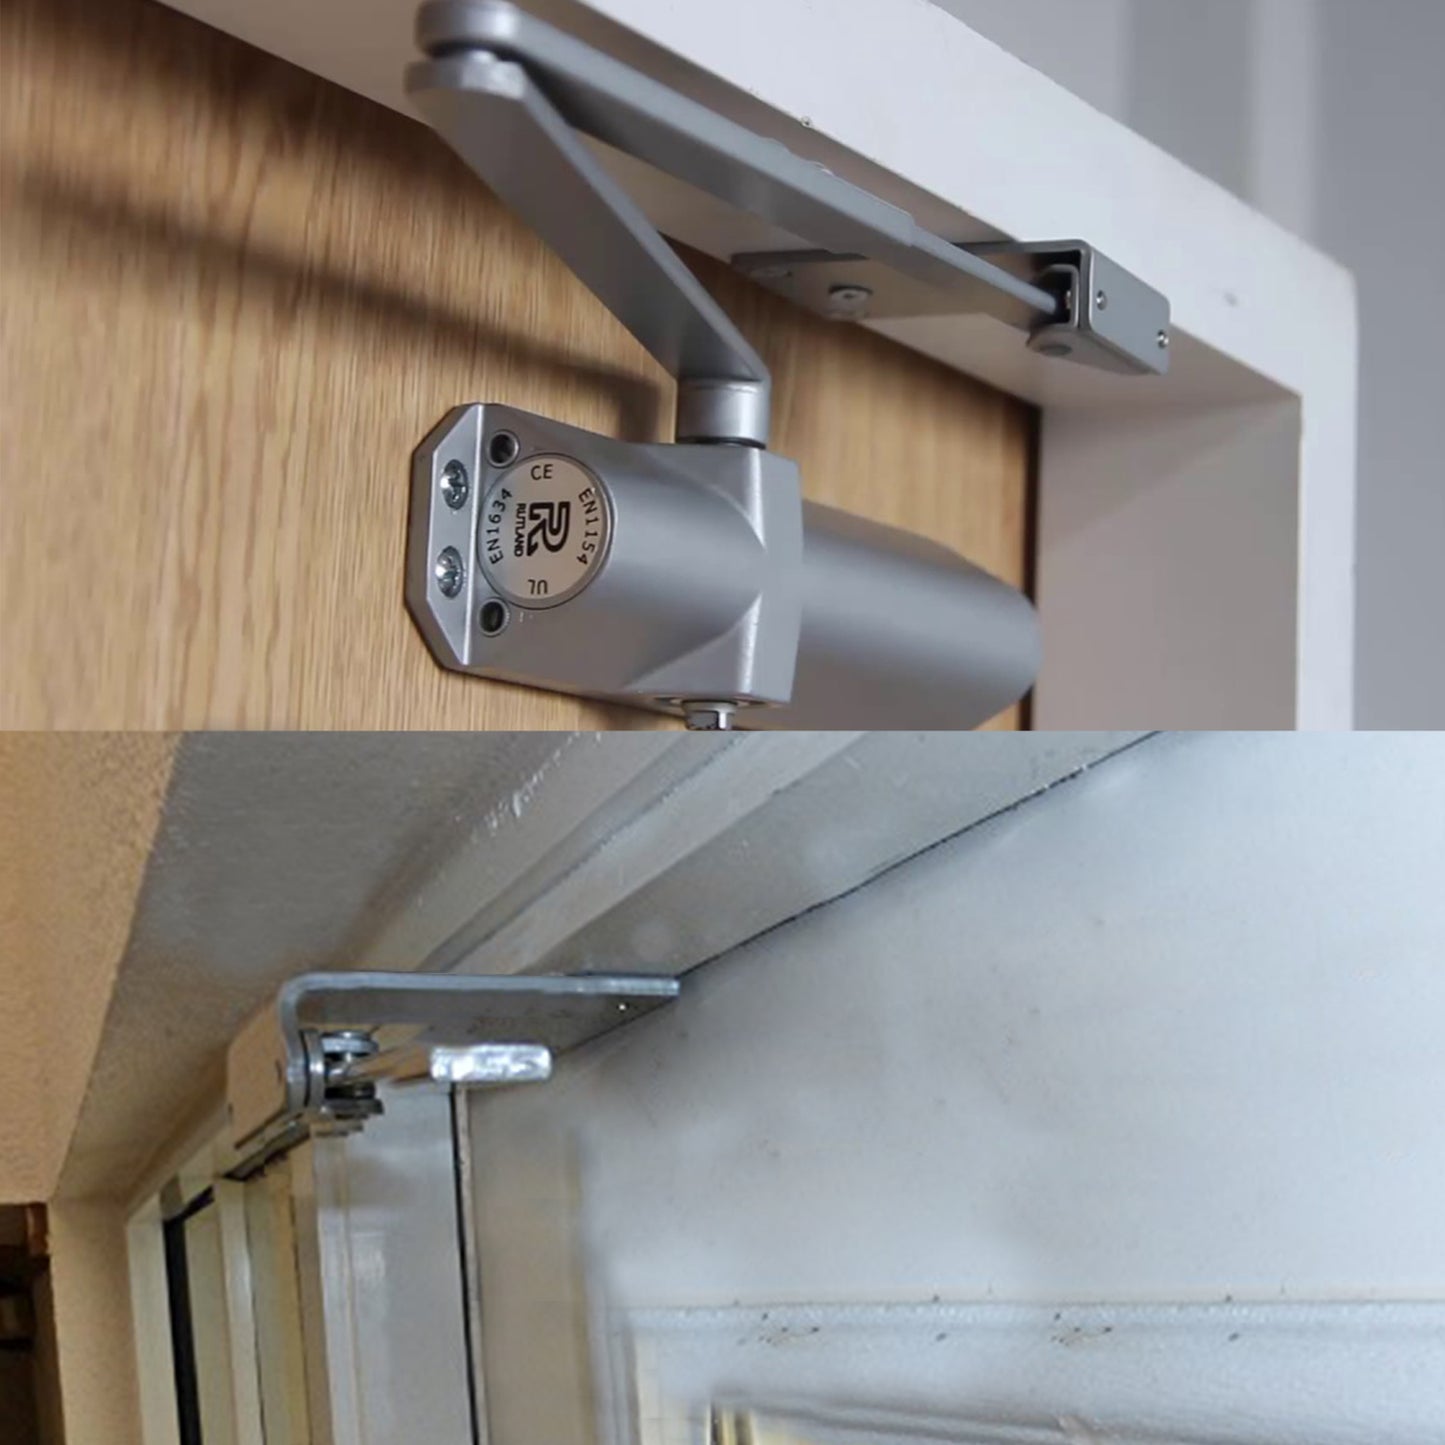 PALMAT Door Closer Parallel Arm Bracket Mount Plate Aluminum Finish Required for Parallel Arm Mounting